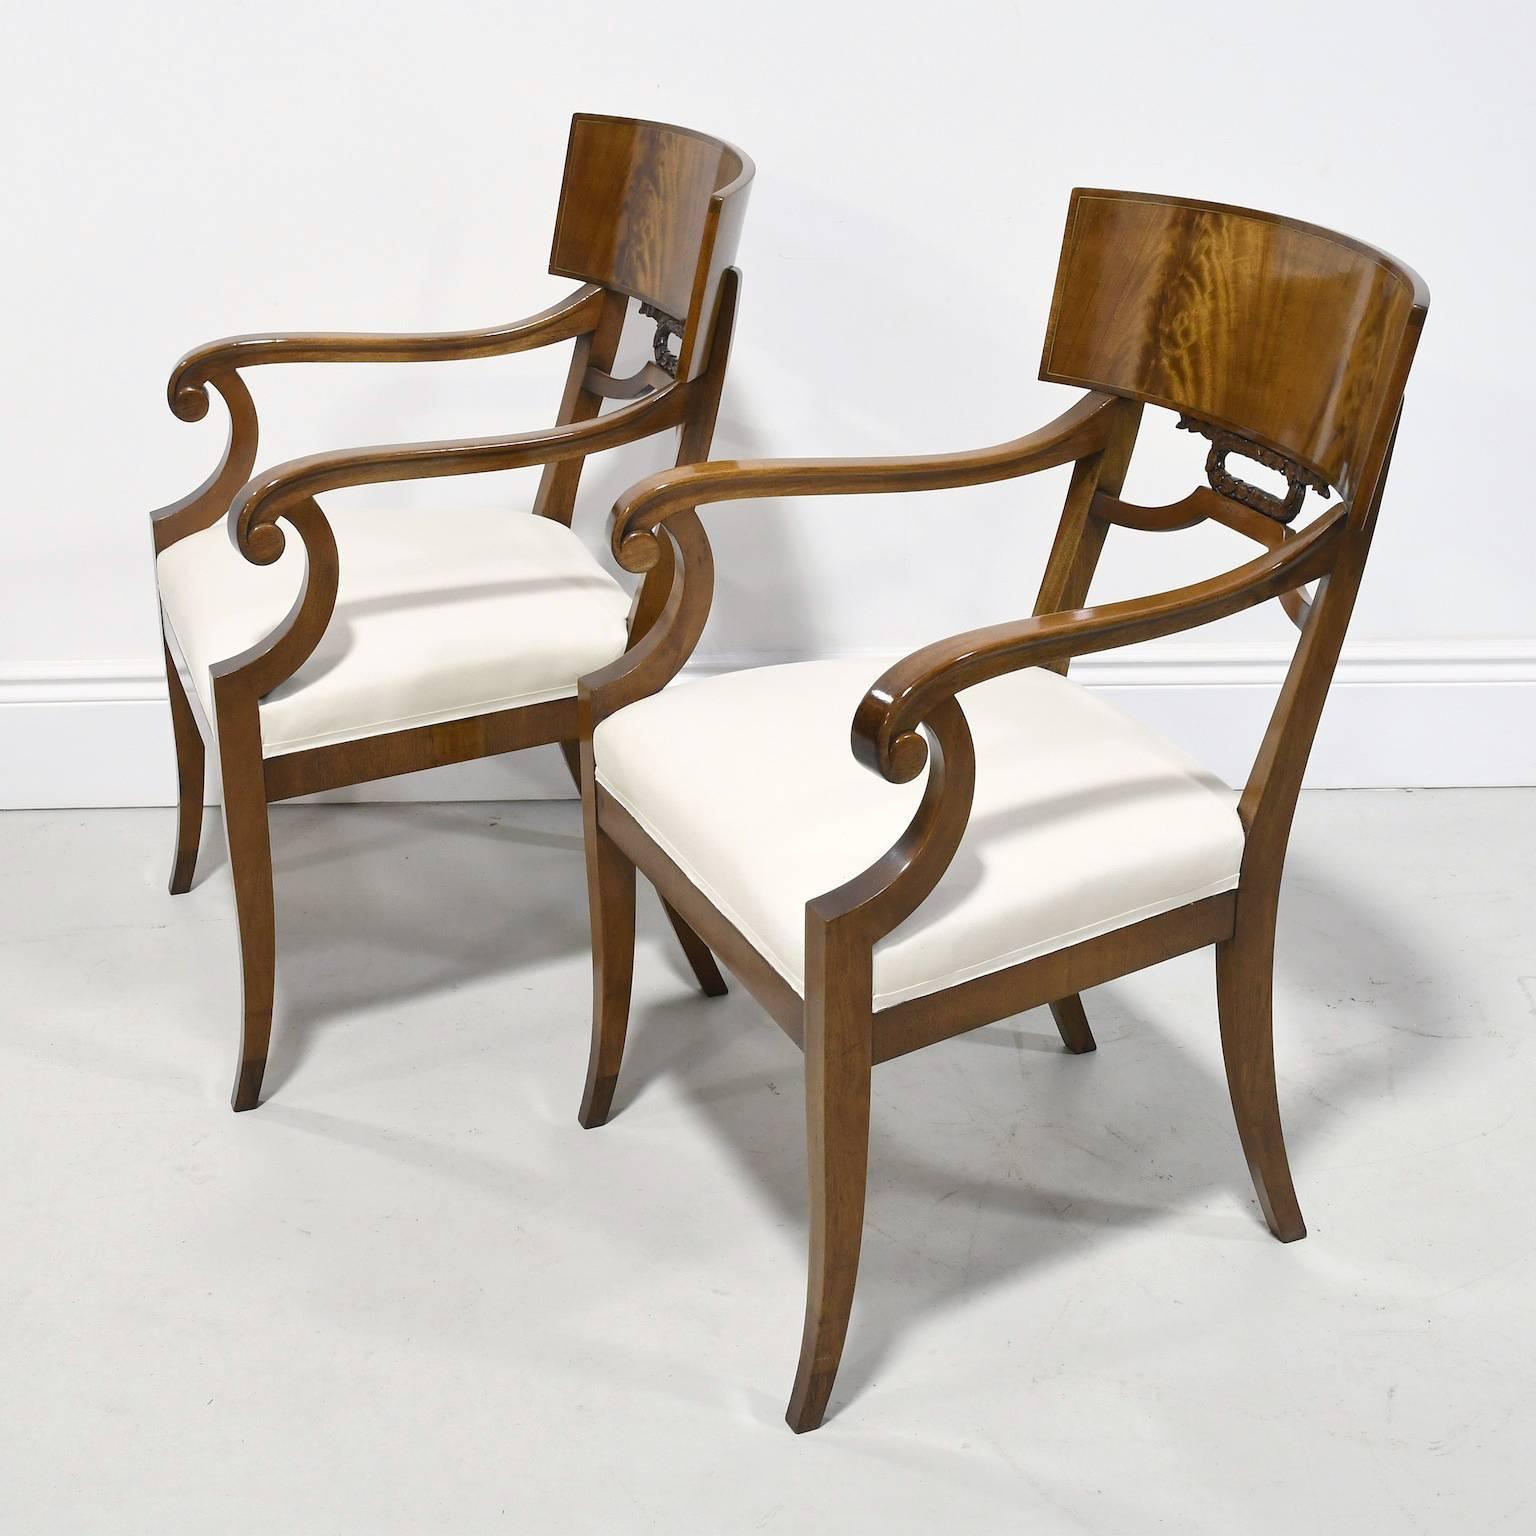 A very handsome and refined pair of Karl Johan-style Empire Klismos armchairs with saber legs from the Art Deco period in Sweden, circa 1920s. These chairs are exquisitely made using Cuban mahogany, Fine joinery techniques, and offer a wider seat